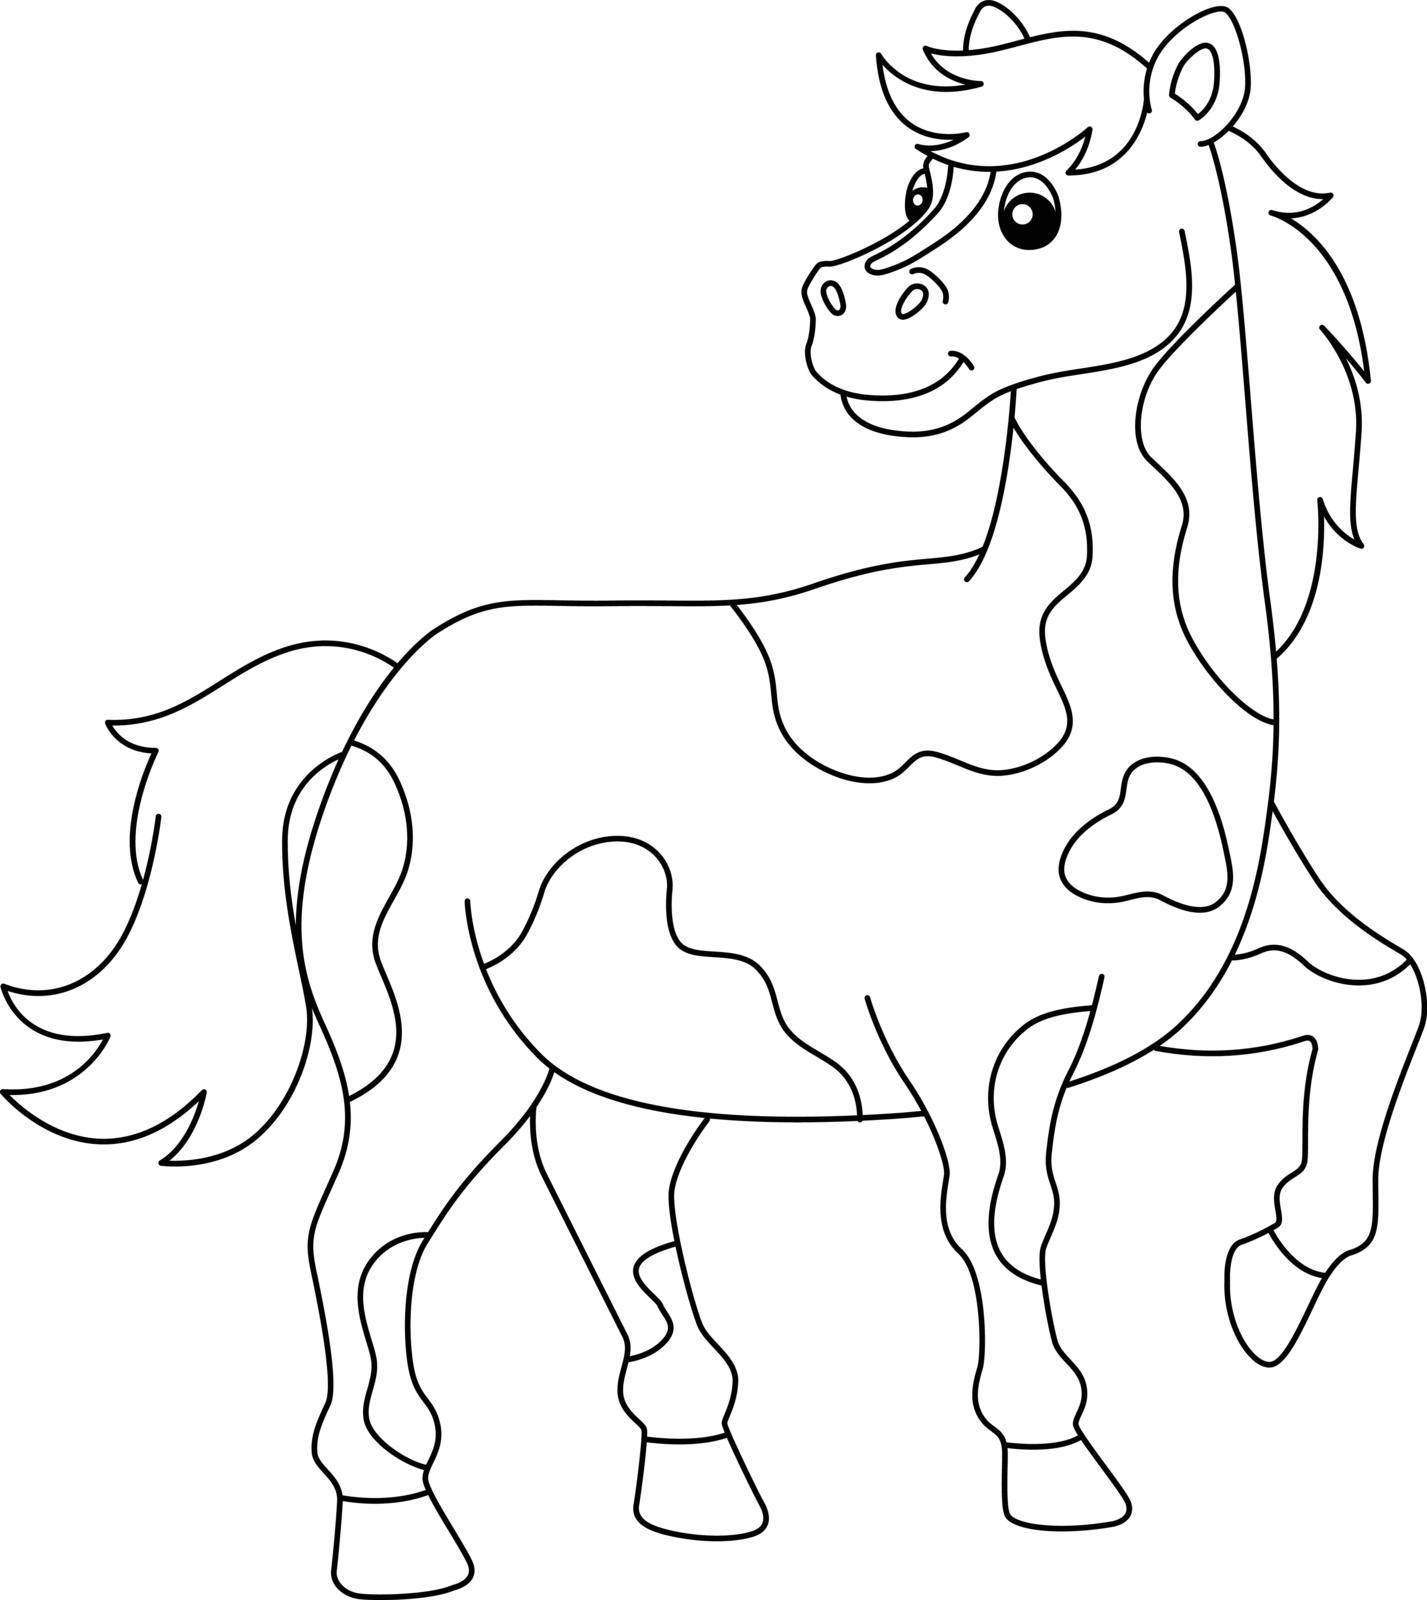 Horse Coloring Page Isolated for Kids by abbydesign